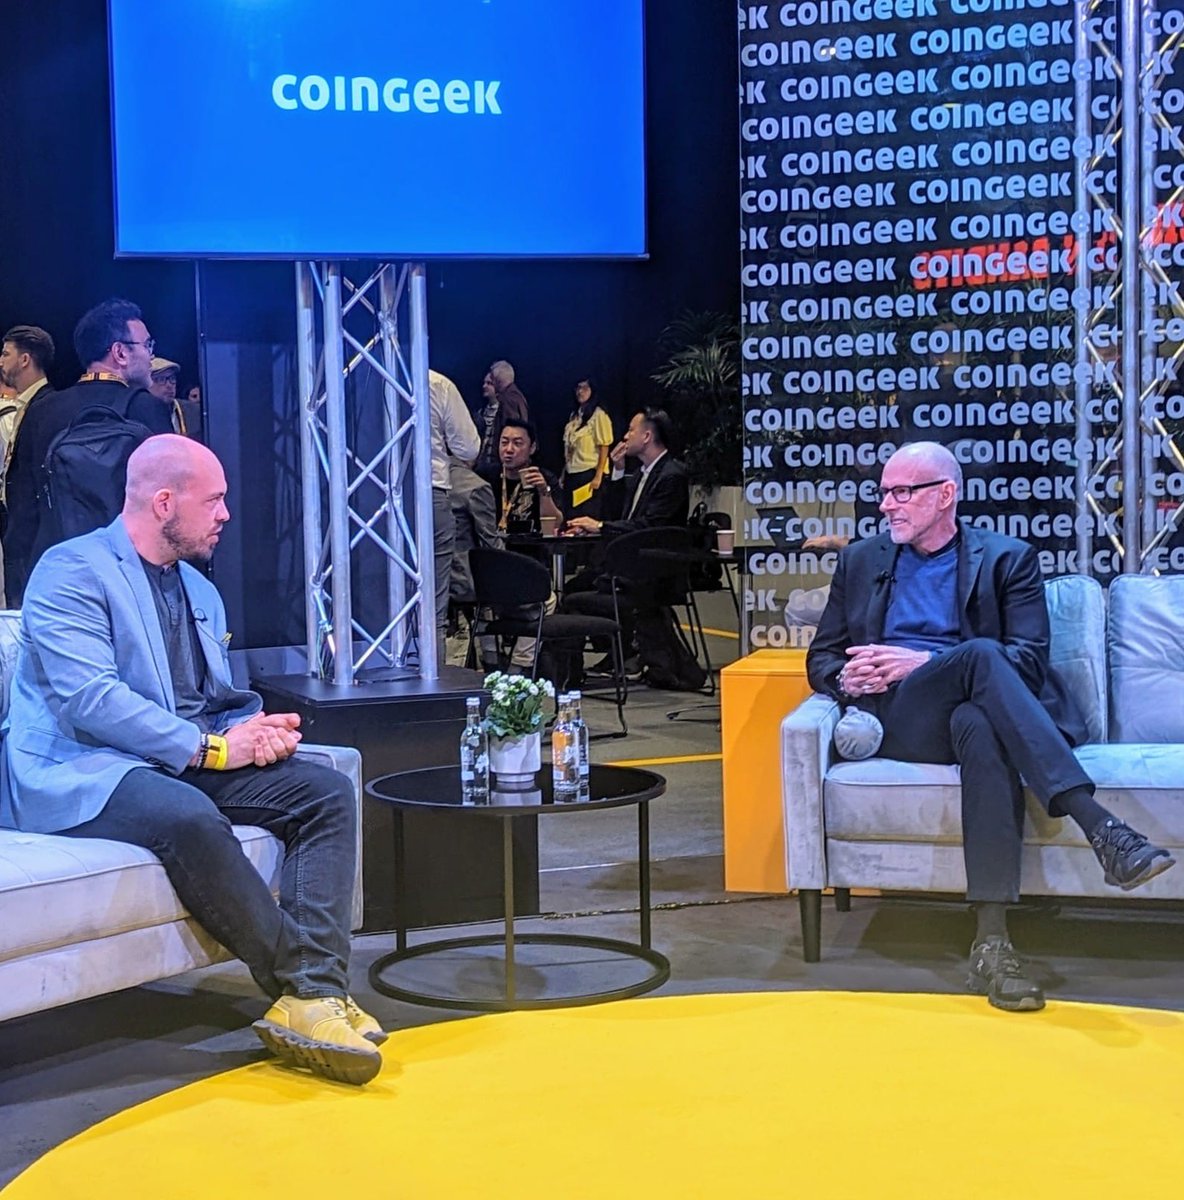 We kick off @LDN_Blockchain with @profgalloway being interviewed by @kurtwuckertjr and discussing blockchain’s role in the economy. Watch this space for more live updates and news. #LDNBlockchain24